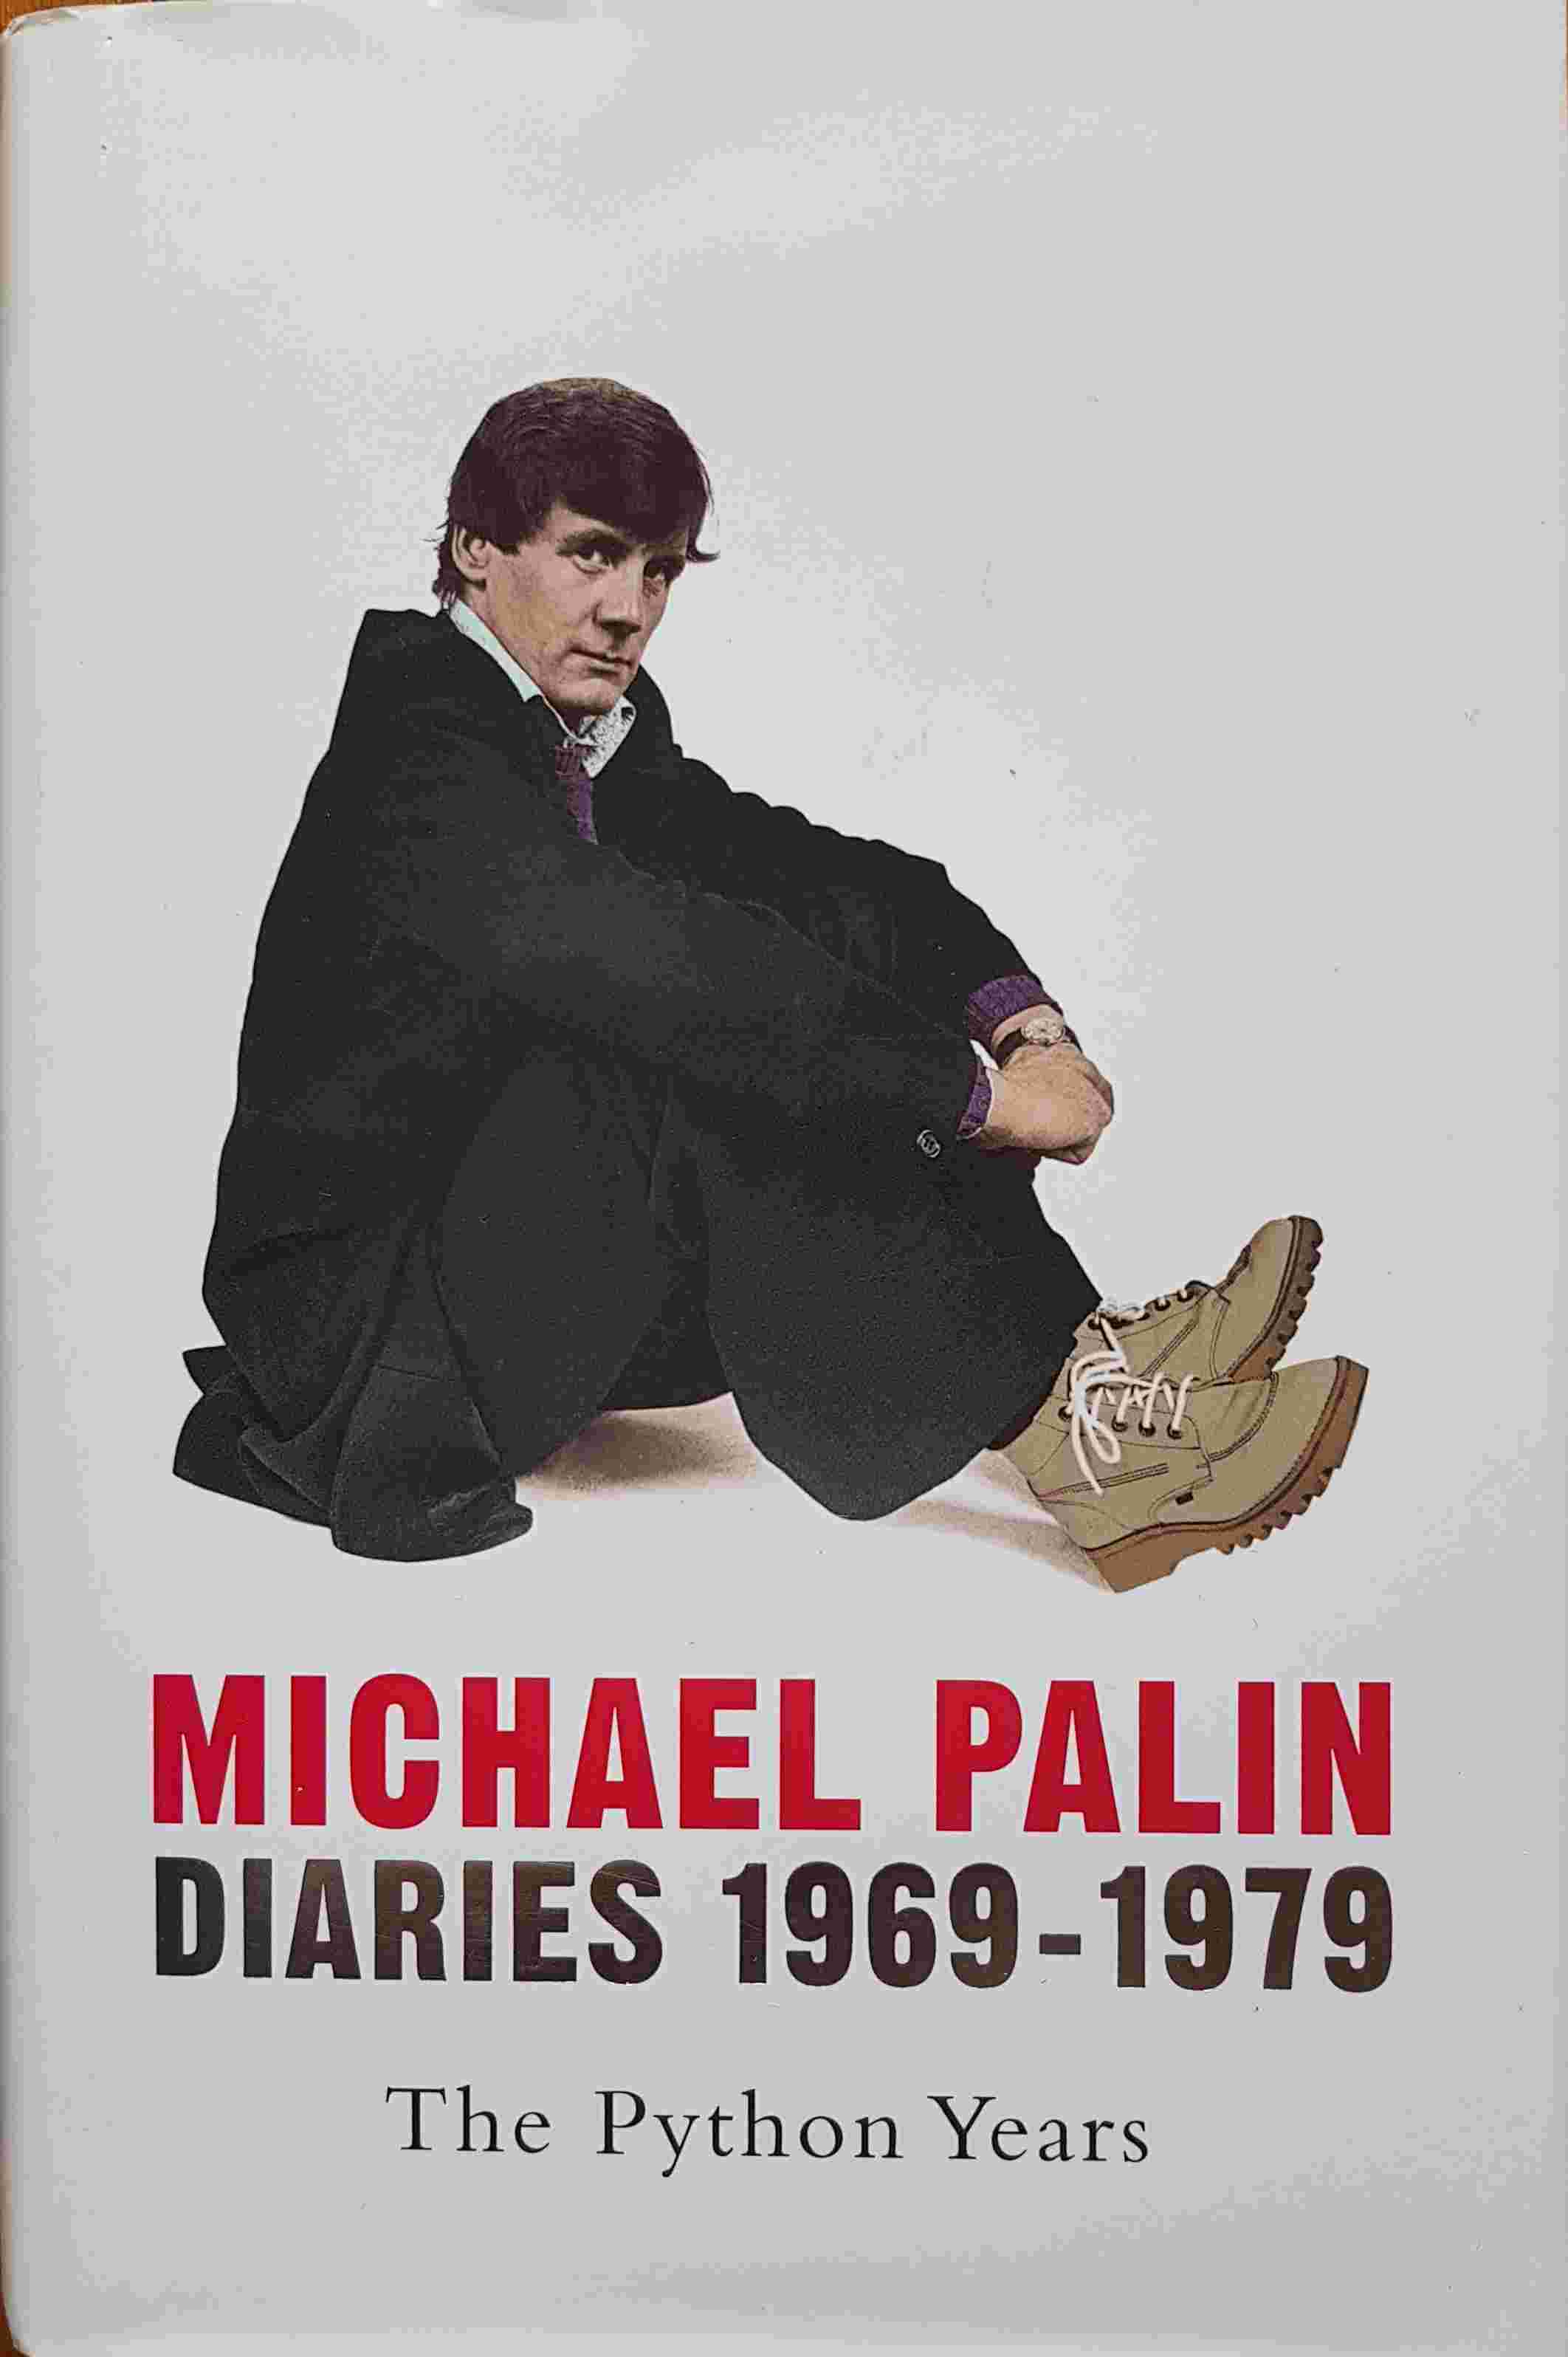 Picture of Michael Palin diaries 1969-1979 - The Python years by artist Michael Palin from the BBC books - Records and Tapes library